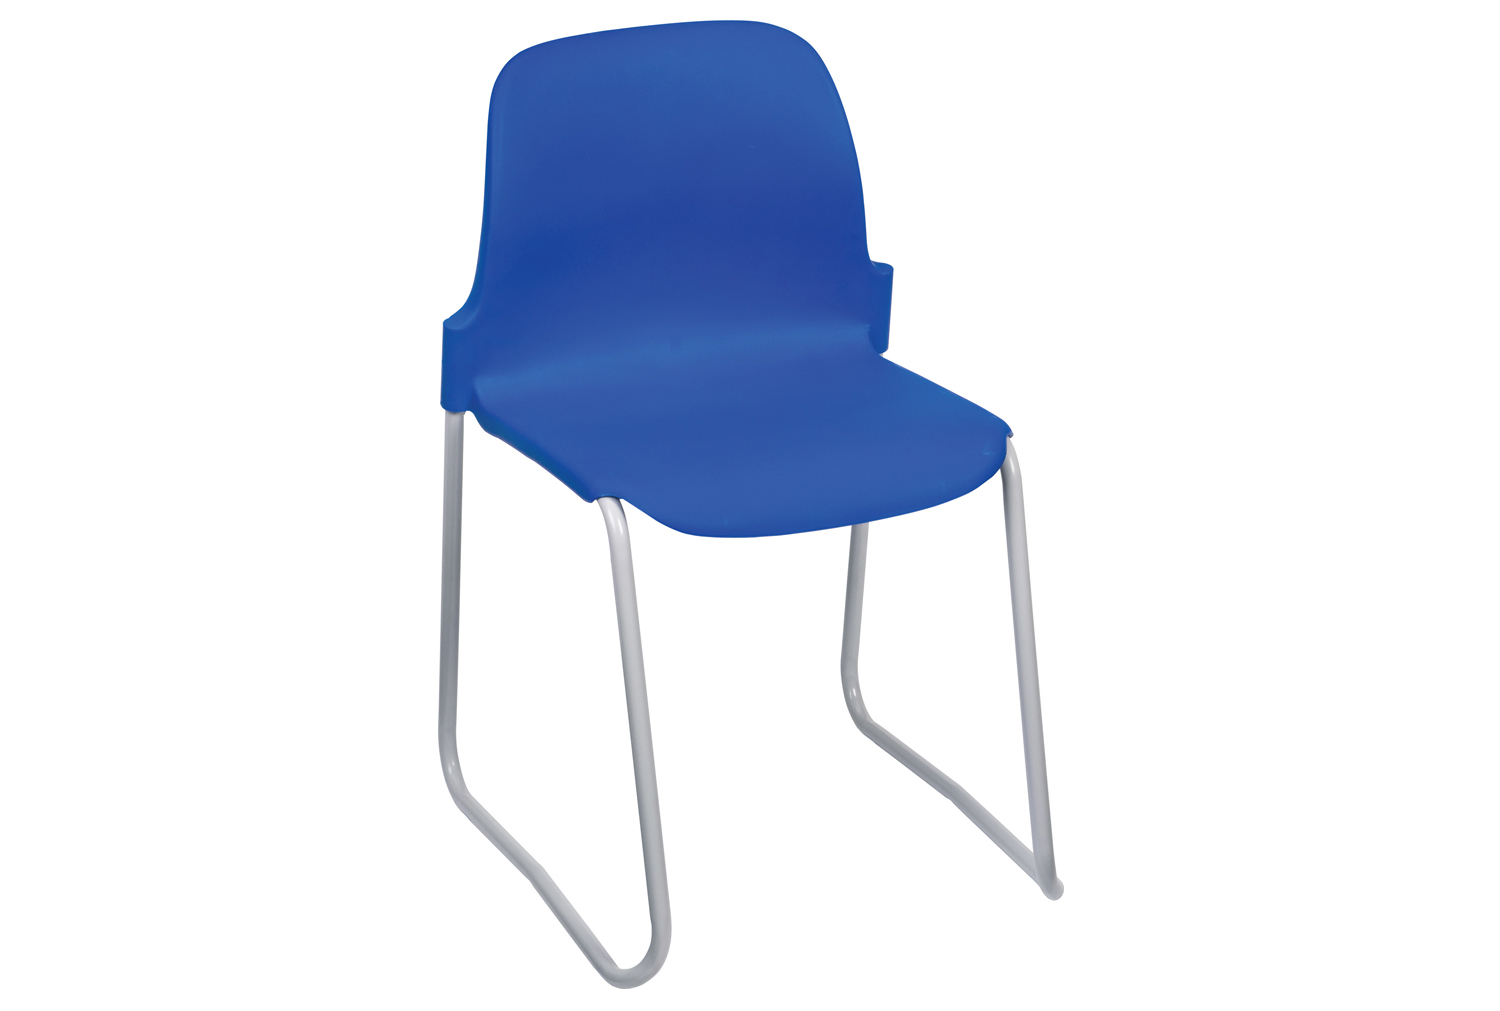 Qty 8 - Proform Masterstack Skidbase Classroom Chair, 14+ Years - 41wx37dx46h (cm), Black Frame, Blue